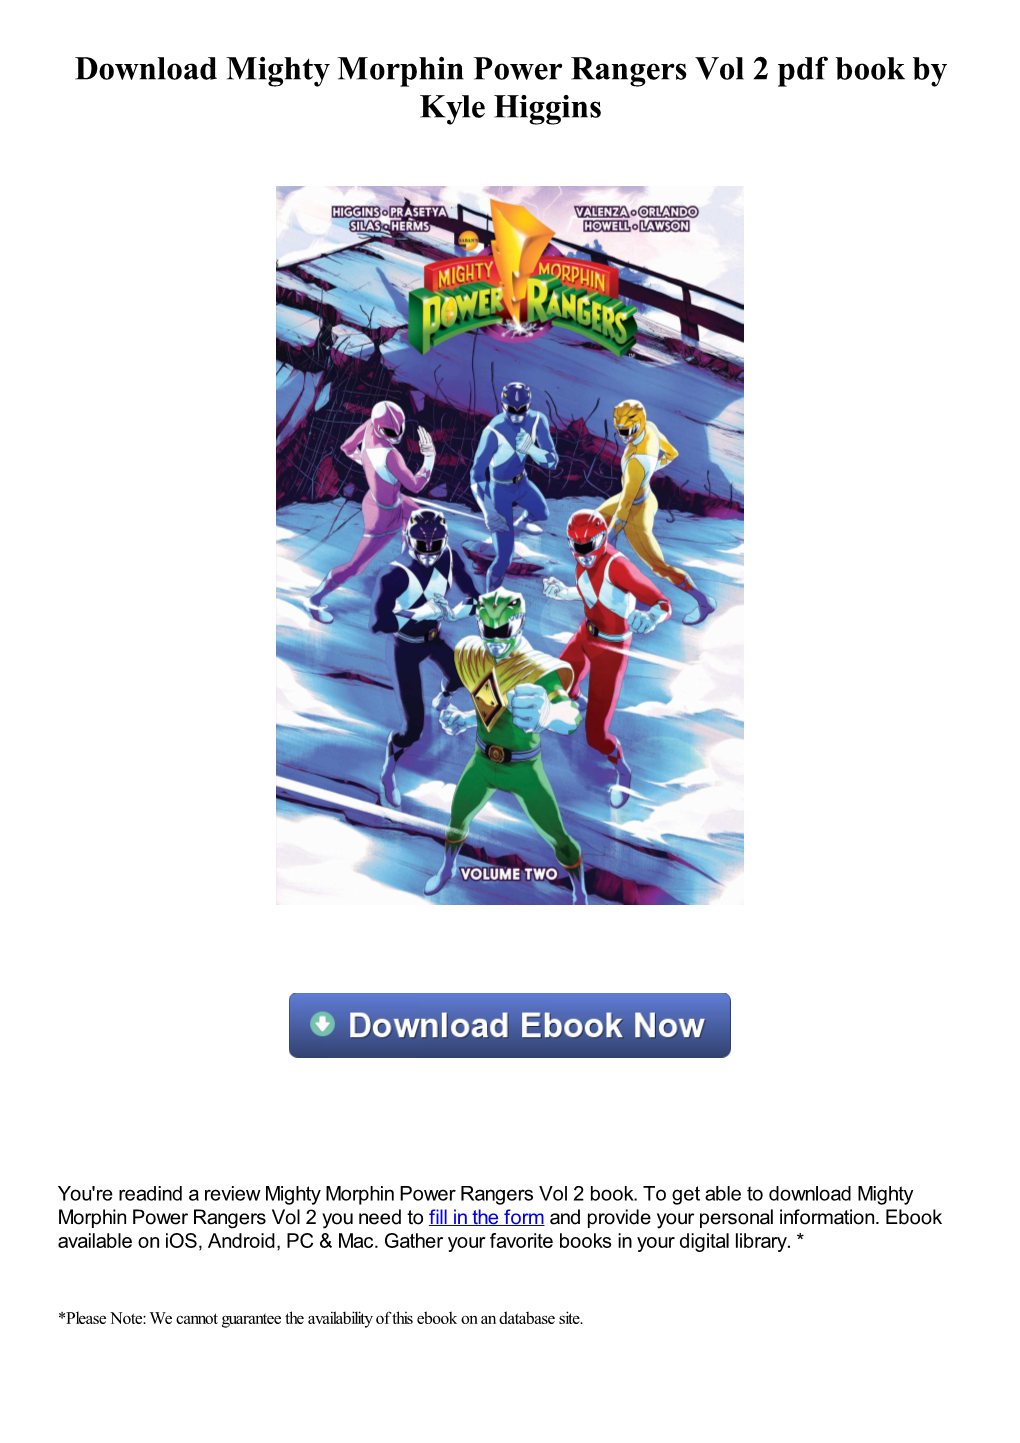 Download Mighty Morphin Power Rangers Vol 2 Pdf Book by Kyle Higgins